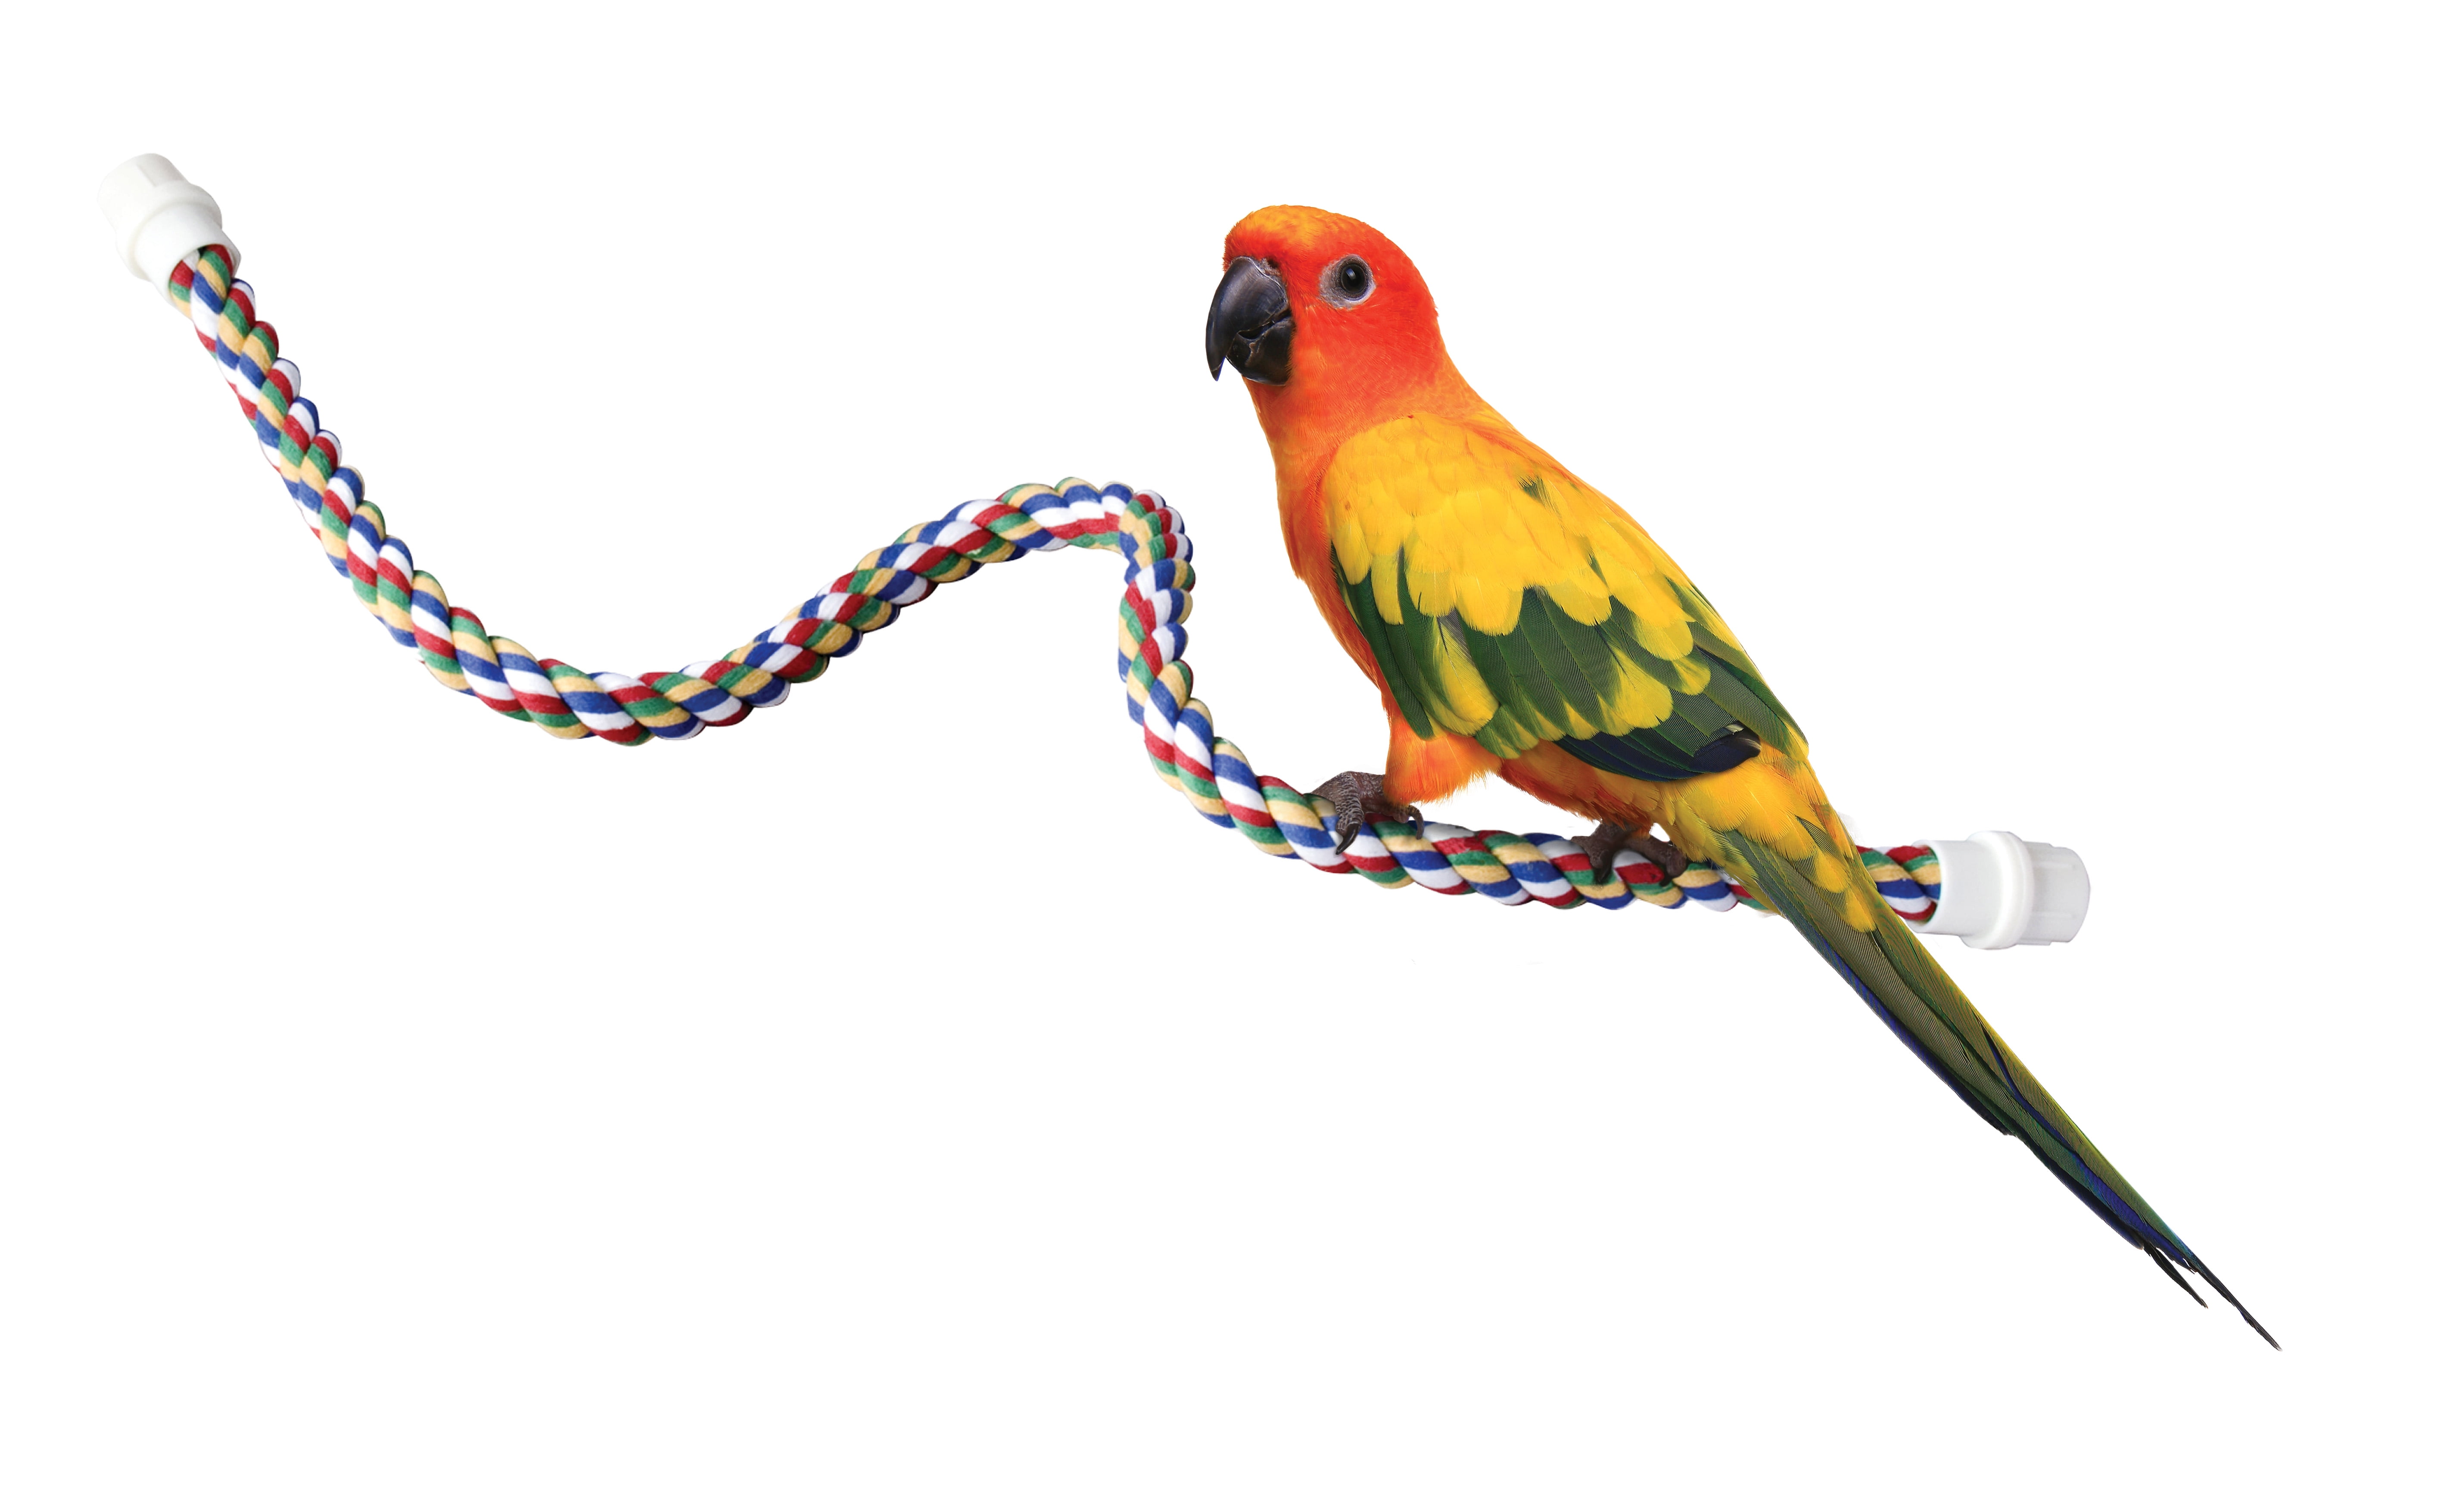 21-Inch L Flexible Multicolor Rope Comfy Perch for Birds Pack of 1